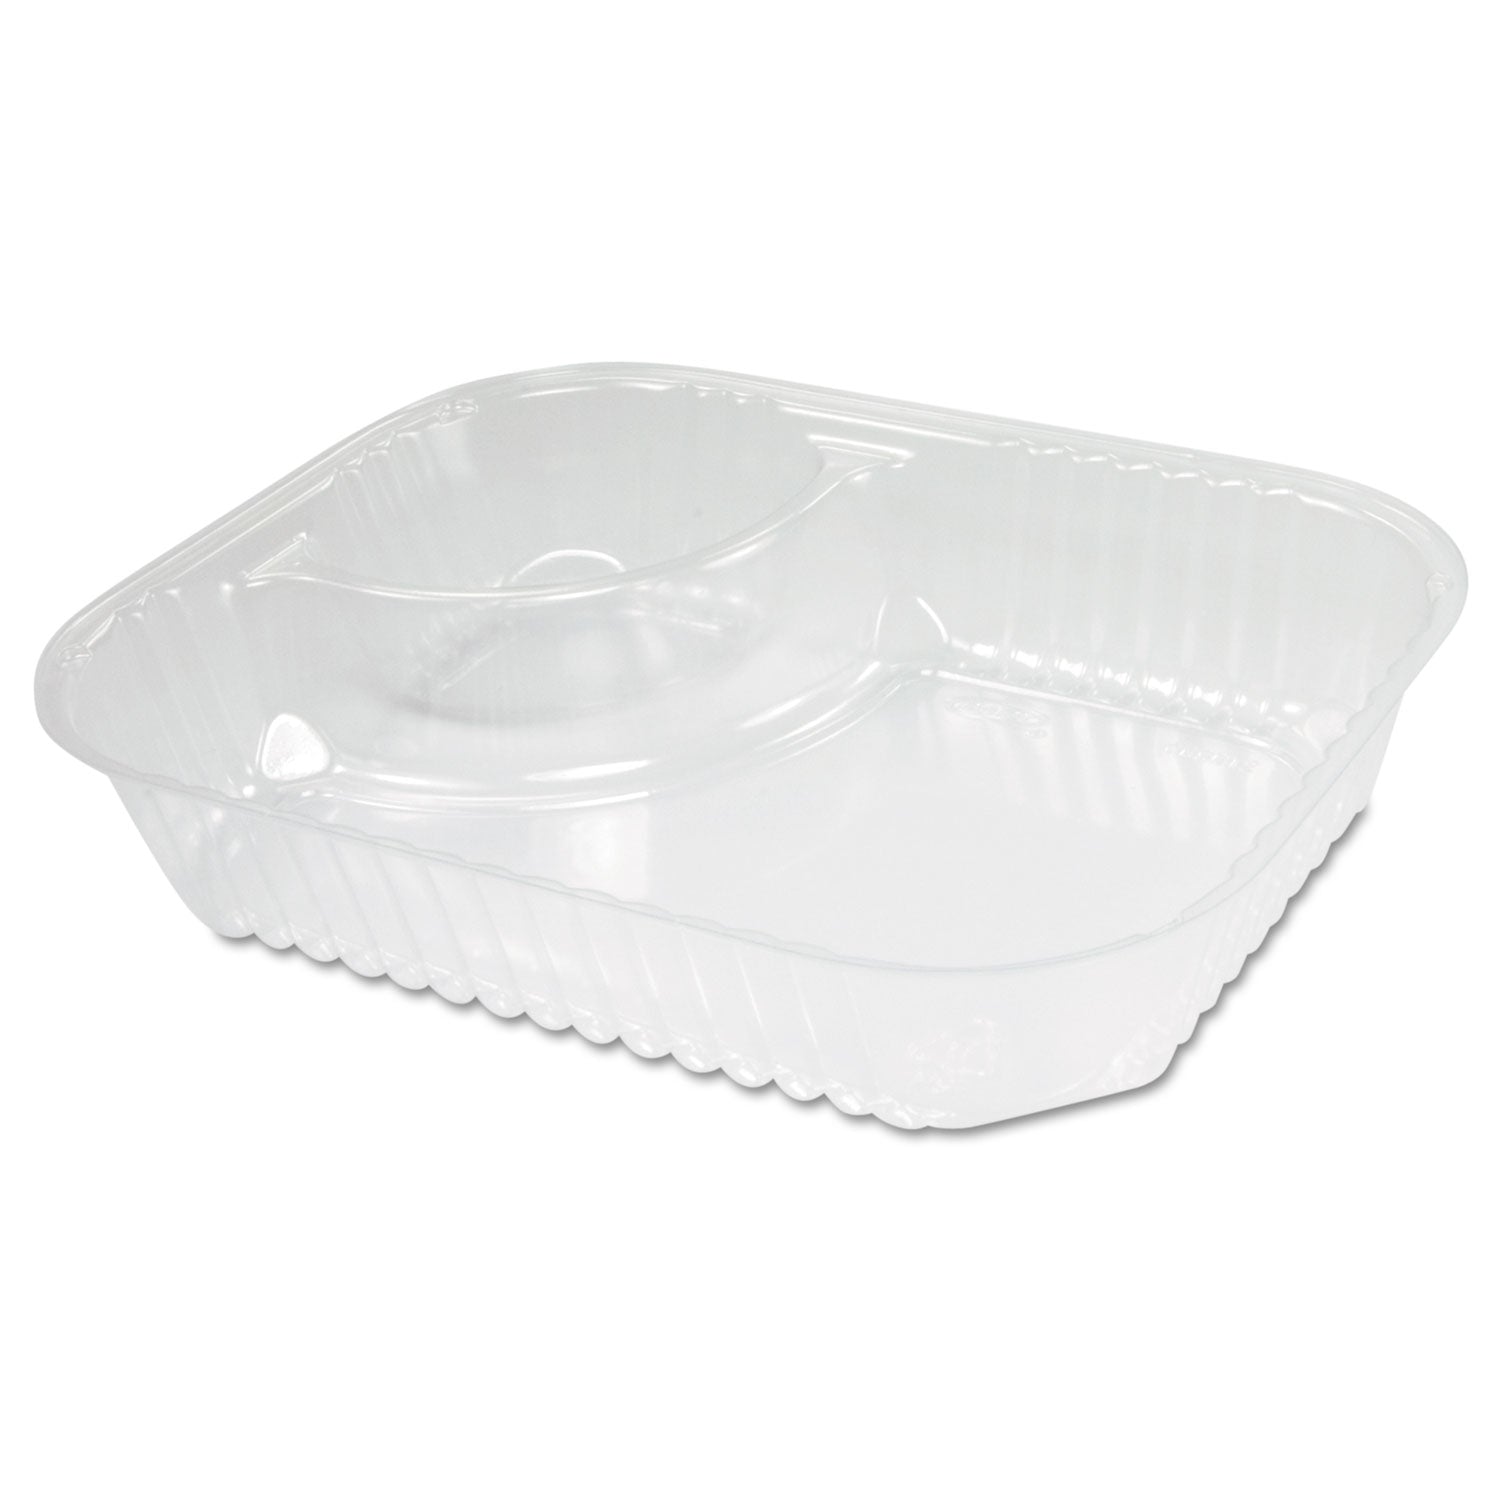 clearpac-large-nacho-tray-2-compartments-33-oz-62-x-62-x-16-clear-plastic-500-carton_dccc68nt2 - 1